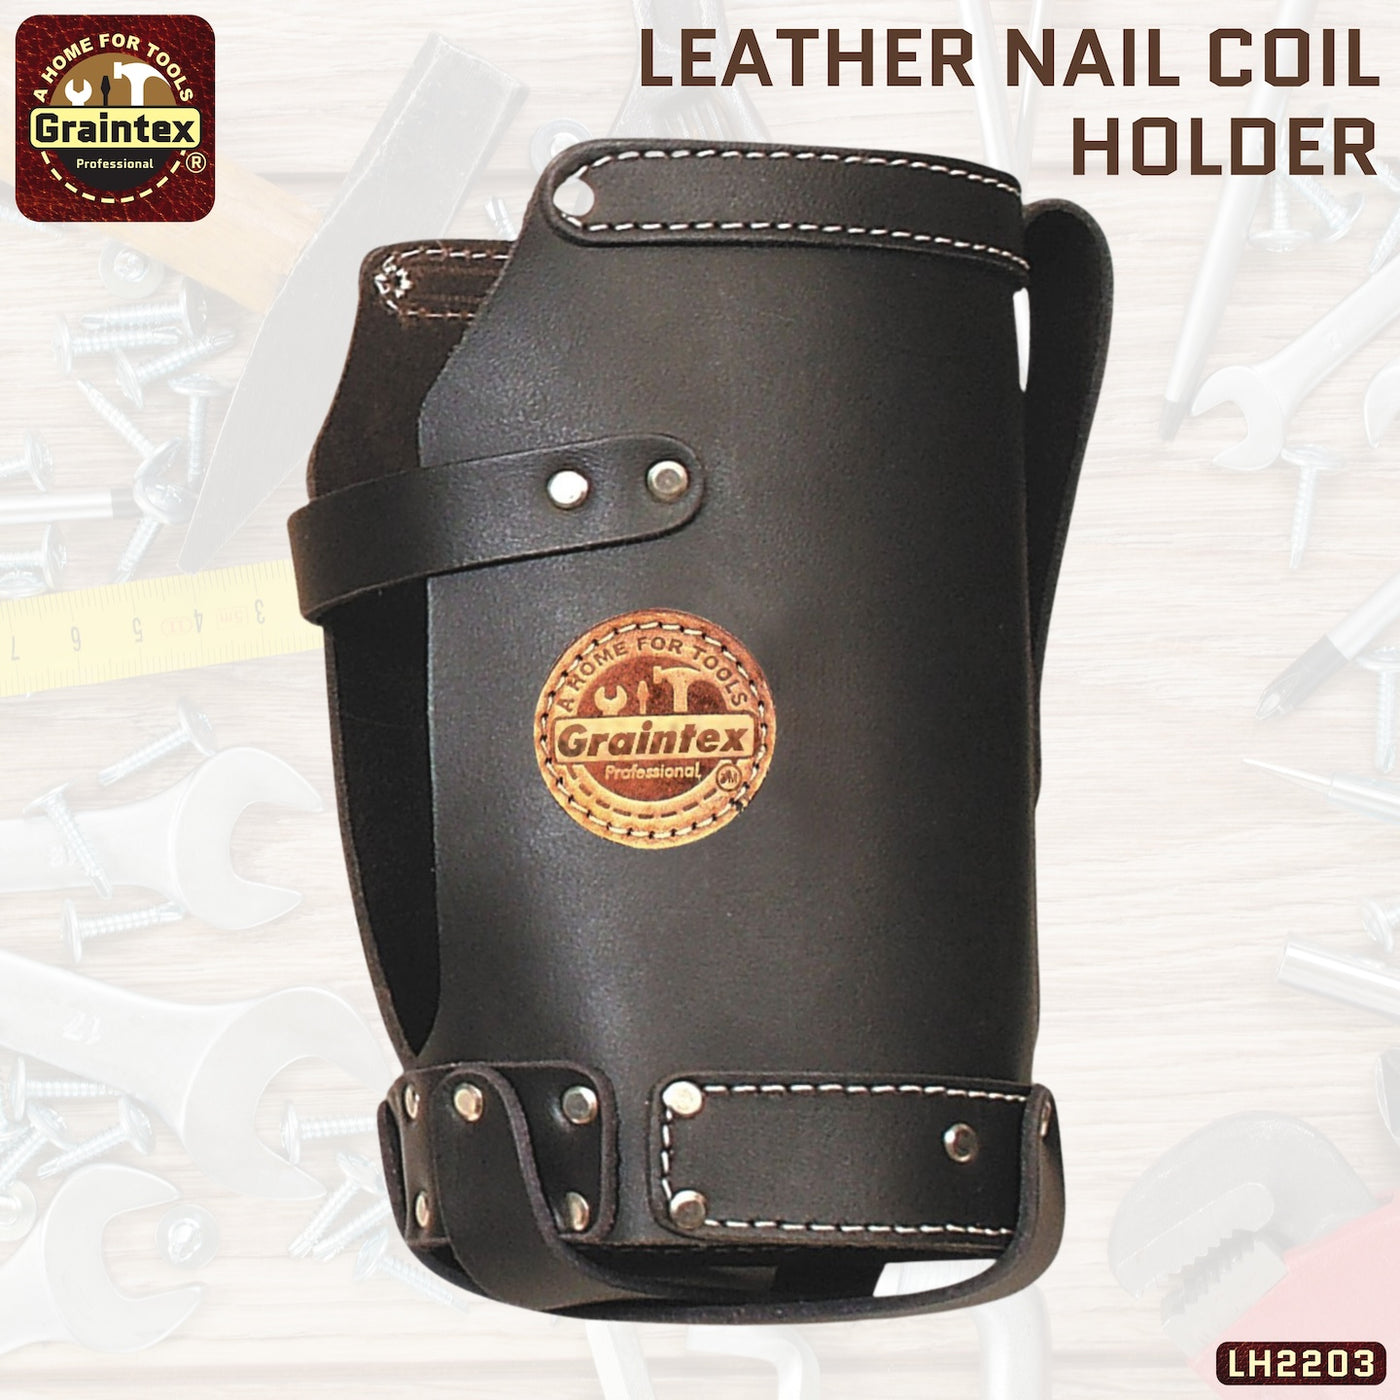 LH2203 :: LEATHER NAIL COIL HOLDER